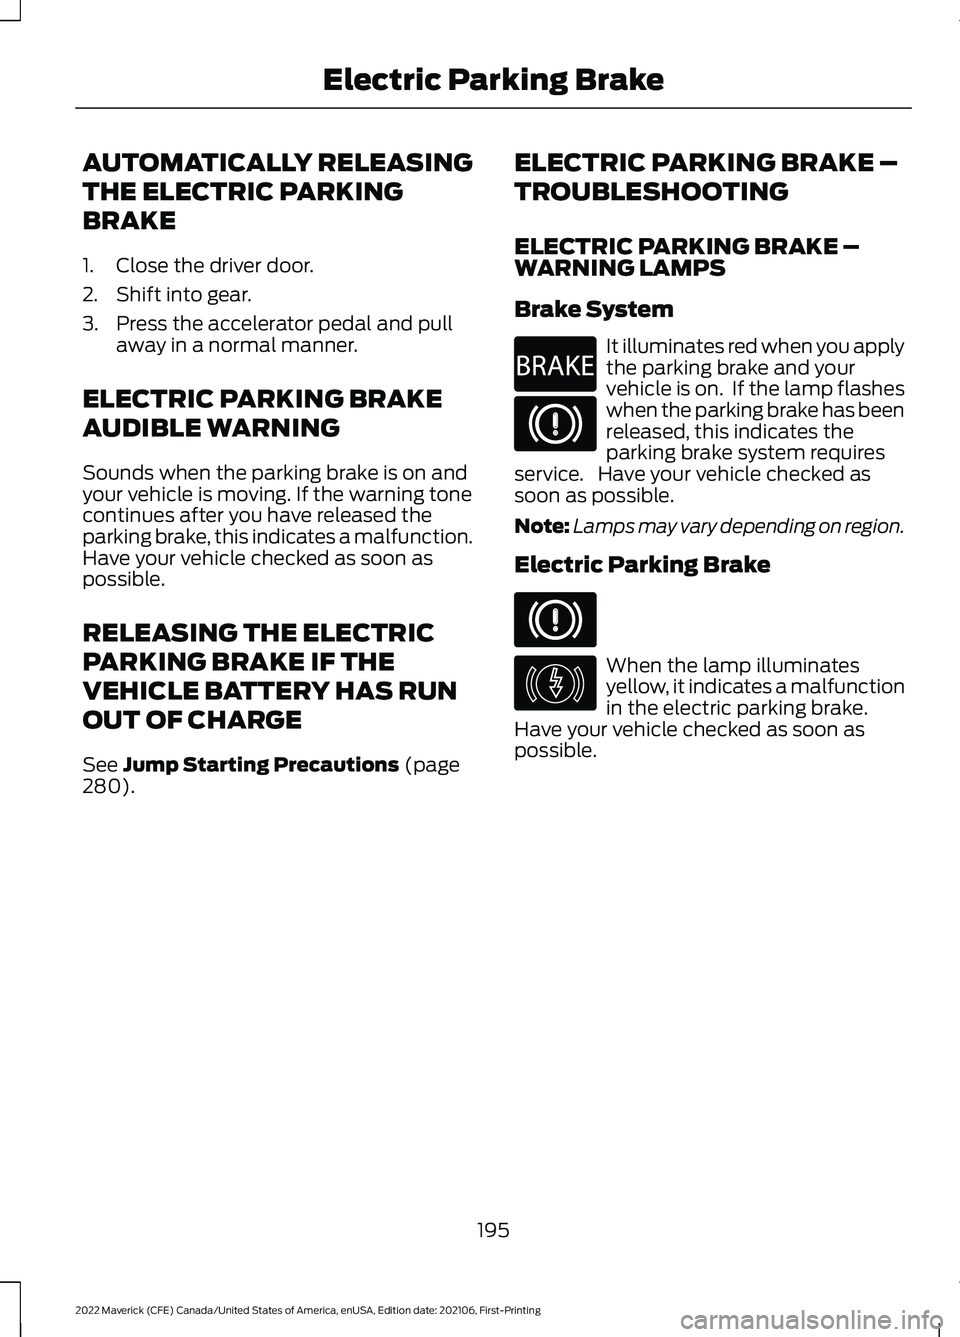 FORD MAVERICK 2022 Owners Manual AUTOMATICALLY RELEASING
THE ELECTRIC PARKING
BRAKE
1. Close the driver door.
2. Shift into gear.
3. Press the accelerator pedal and pull
away in a normal manner.
ELECTRIC PARKING BRAKE
AUDIBLE WARNING